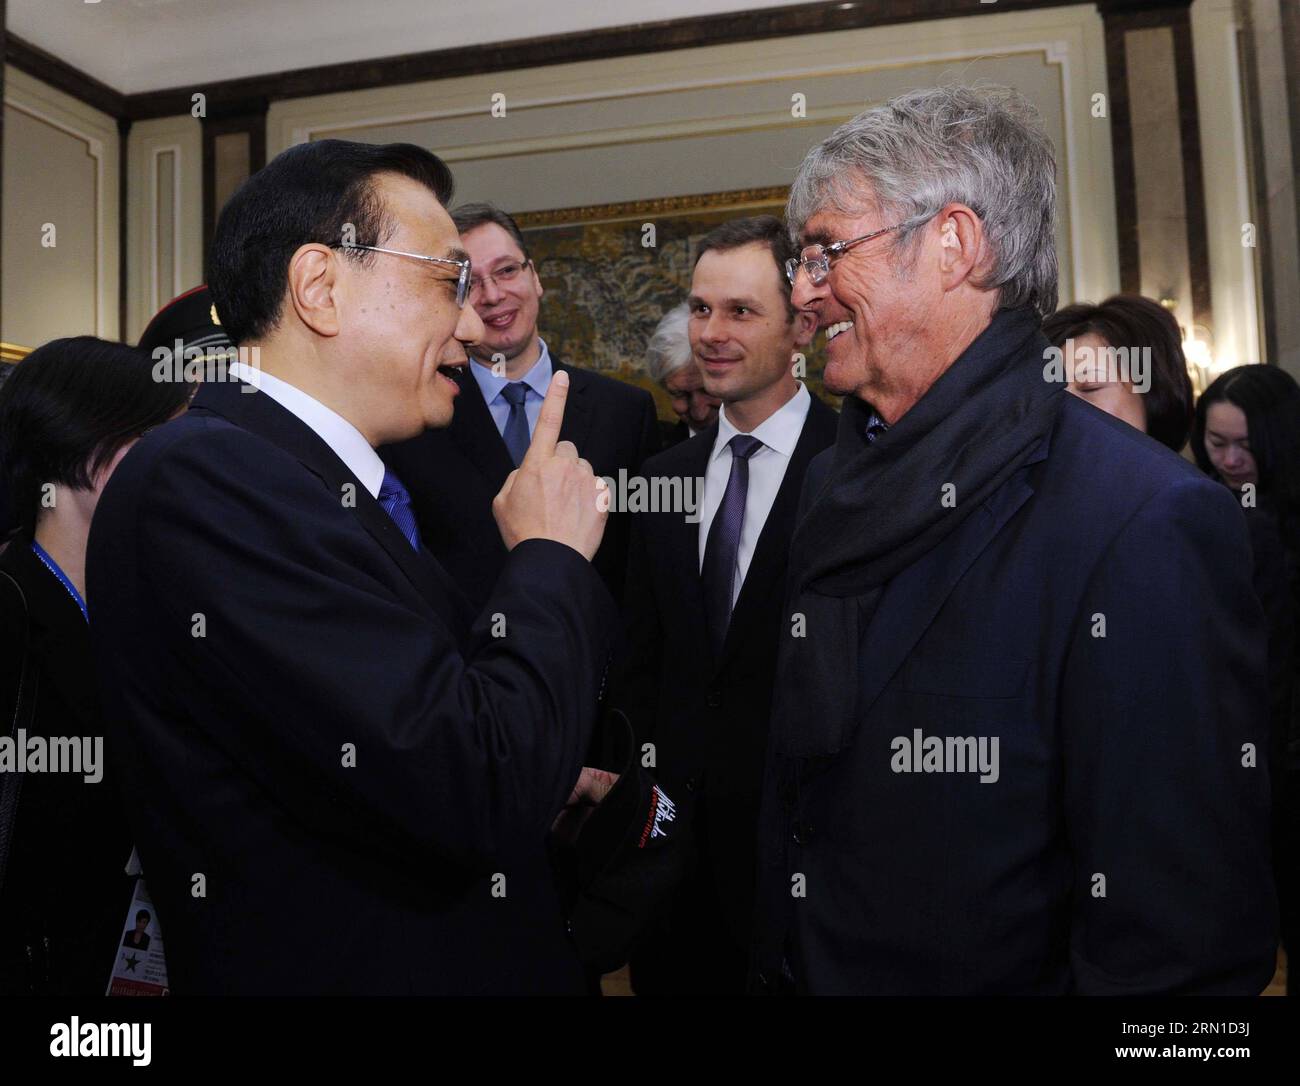 BELGRADE, Dec. 18, 2014 -- Chinese Premier Li Keqiang (L, front) talks with famous soccer coach Bora Milutinovic in Belgrade, Serbia, Dec. 18, 2014. Li was presented the charter of honorary citizen of Belgrade on Thursday afternoon and exchanged views with some distinguished Serbian personages on expanding bilateral cooperation in such areas as culture and sports. ) (lfj) SERBIA-BELGRADE-CHINA-LI KEQIANG-VISIT RaoxAimin PUBLICATIONxNOTxINxCHN   Belgrade DEC 18 2014 Chinese Premier left Keqiang l Front Talks With Famous Soccer Coach Bora Milutinovic in Belgrade Serbia DEC 18 2014 left what pres Stock Photo